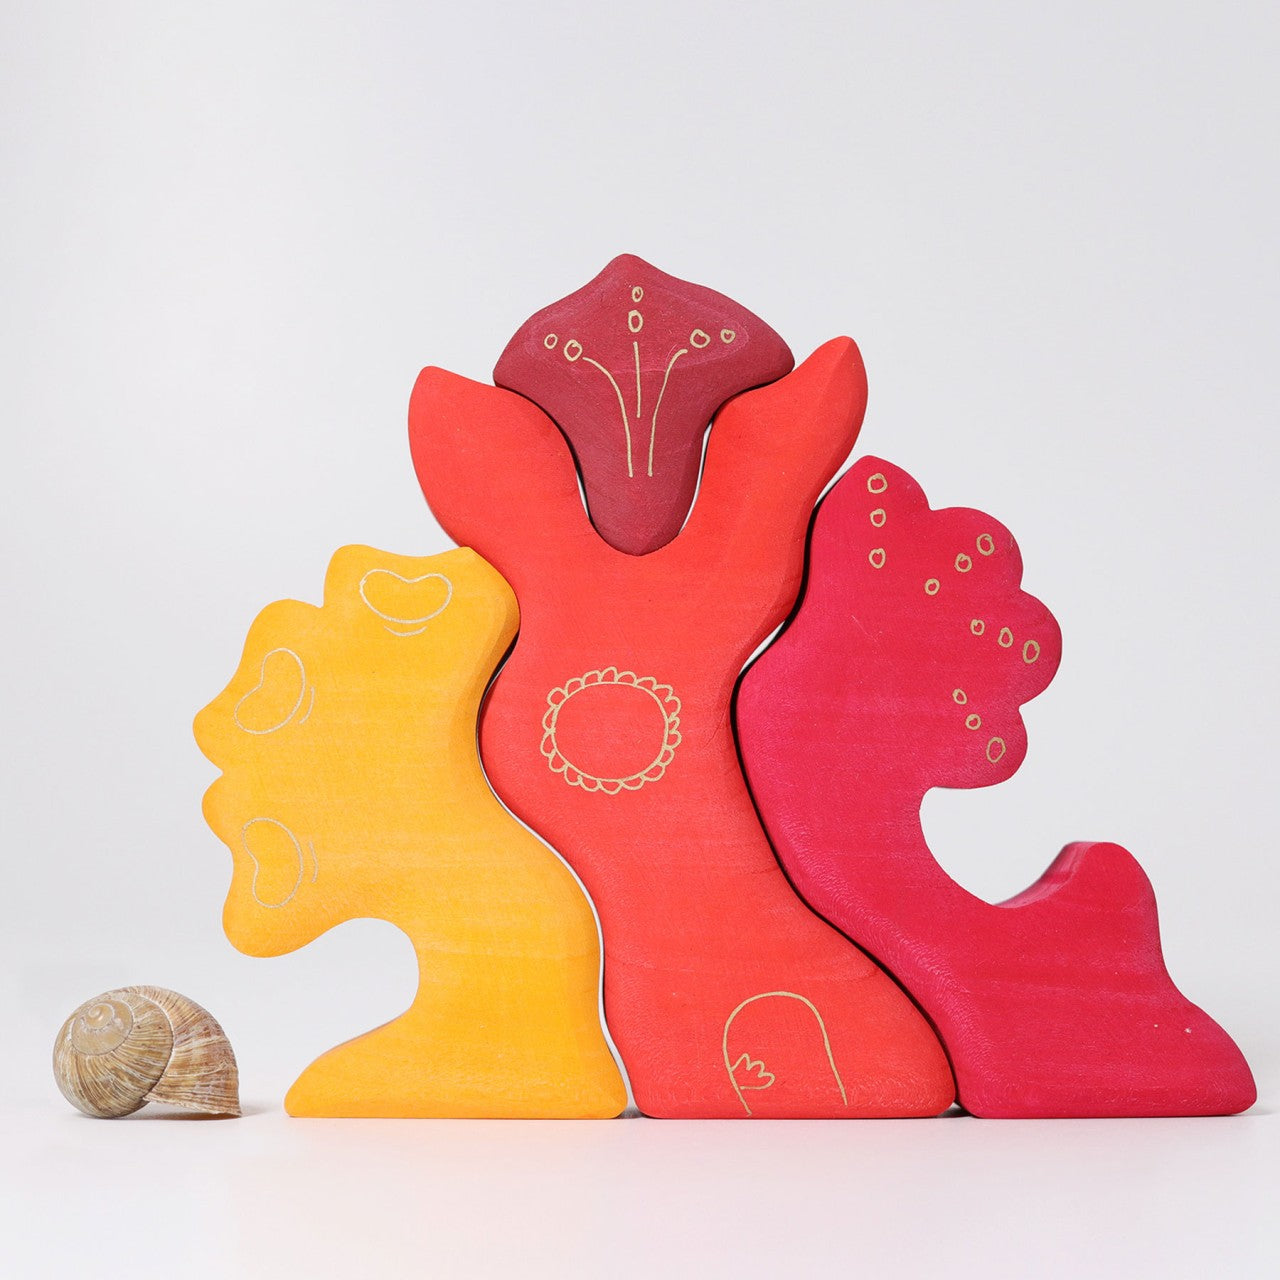 Casa Glora | 4 Pieces | Wooden Toys for Kids | Open-Ended Play